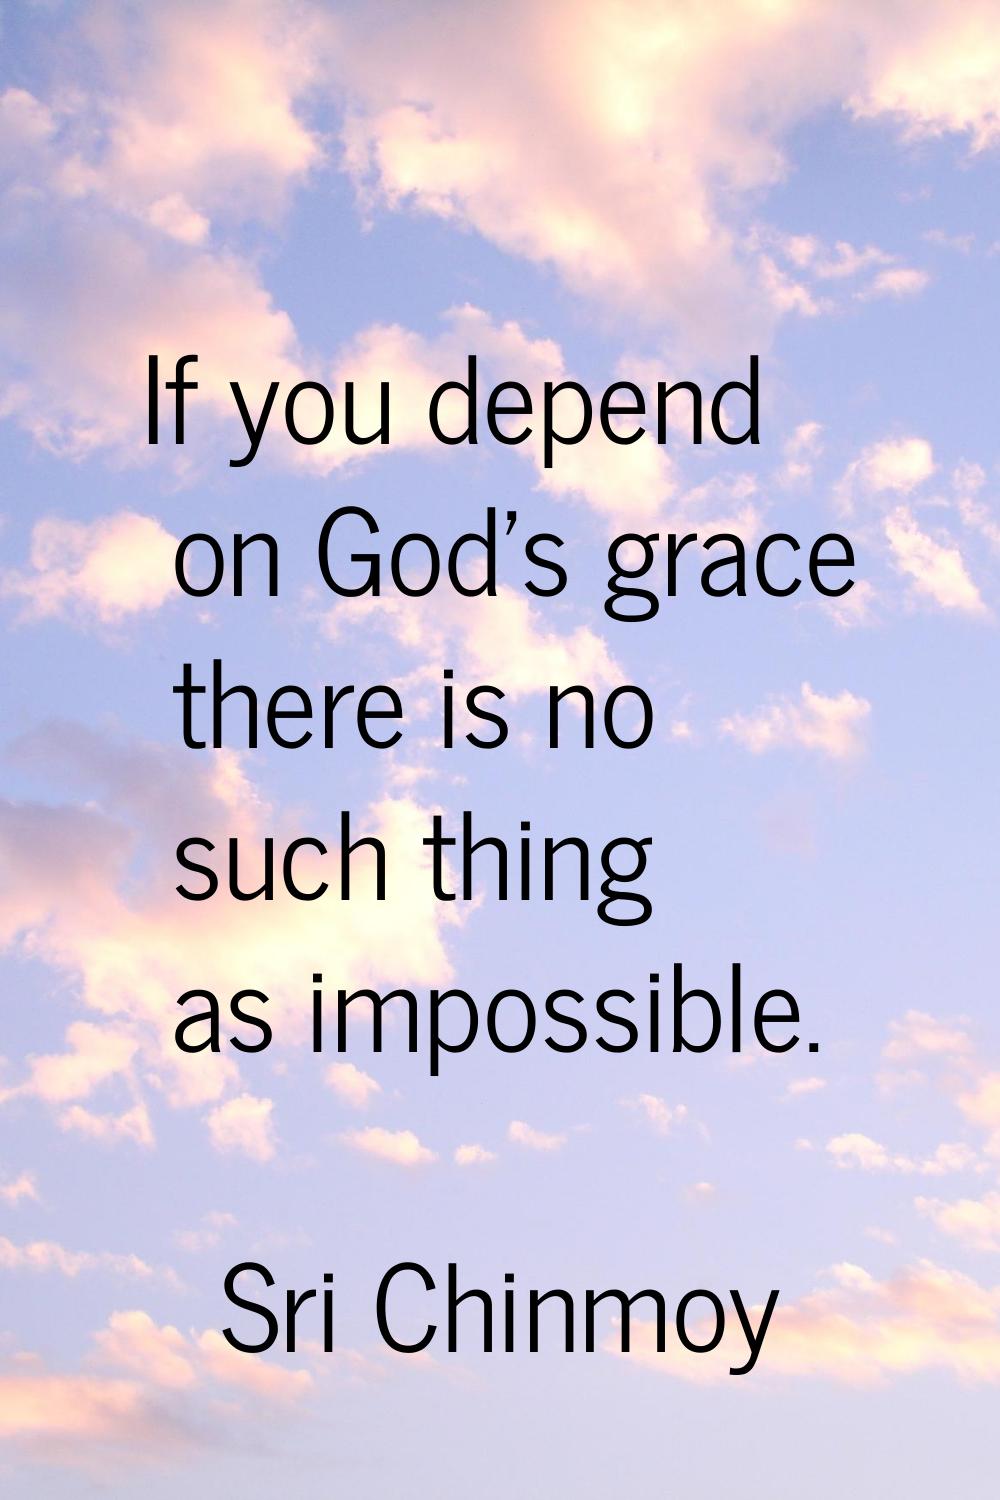 If you depend on God's grace there is no such thing as impossible.